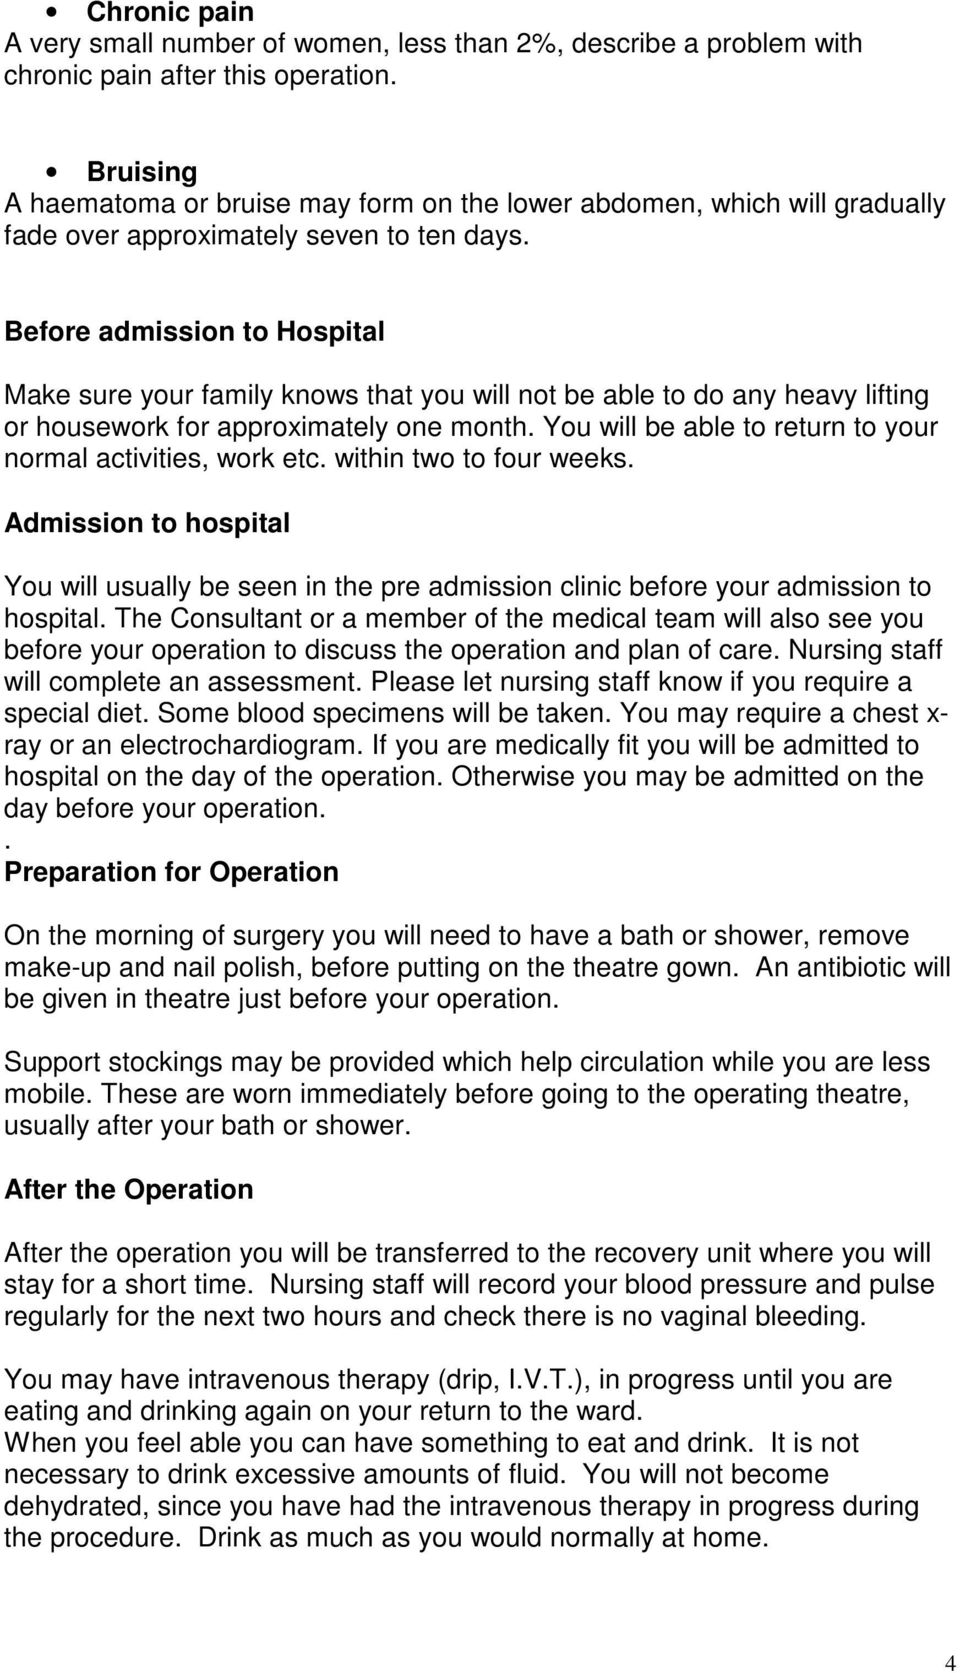 Before admission to Hospital Make sure your family knows that you will not be able to do any heavy lifting or housework for approximately one month.